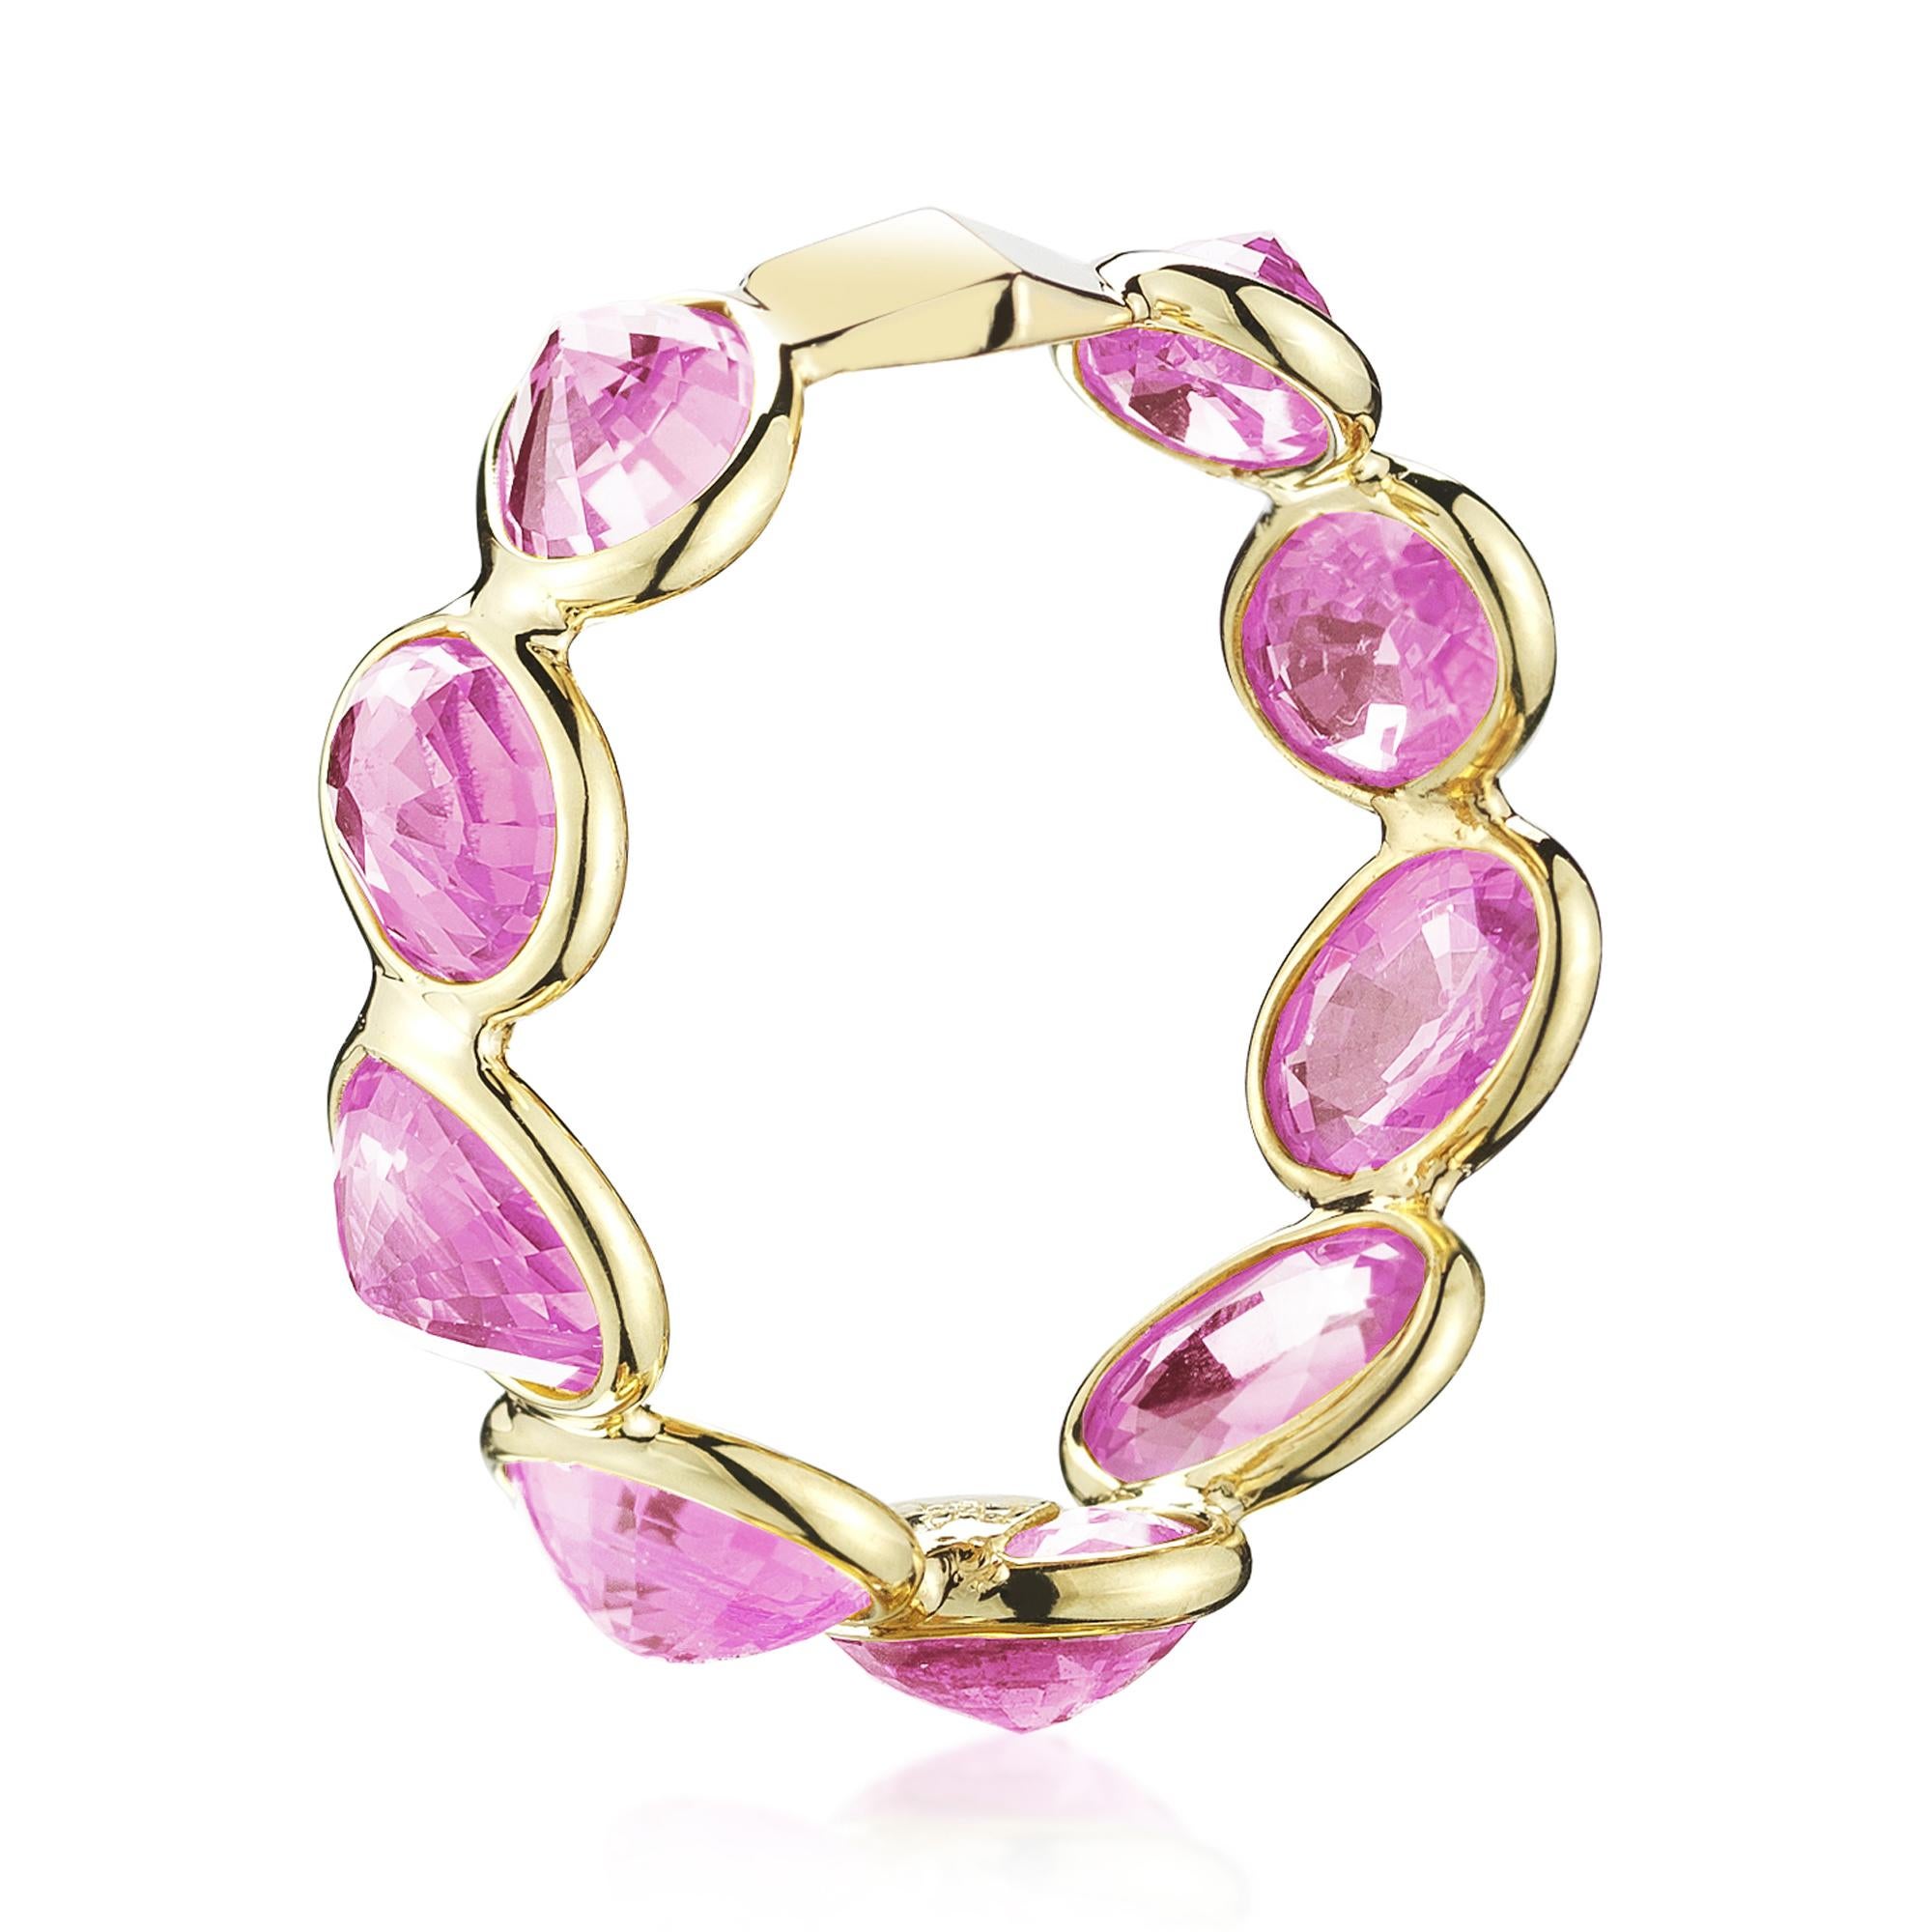 Contemporary Paolo Costagli 18 Karat Yellow Gold Pink Sapphire, 4.86 Carat Ombre Ring For Sale